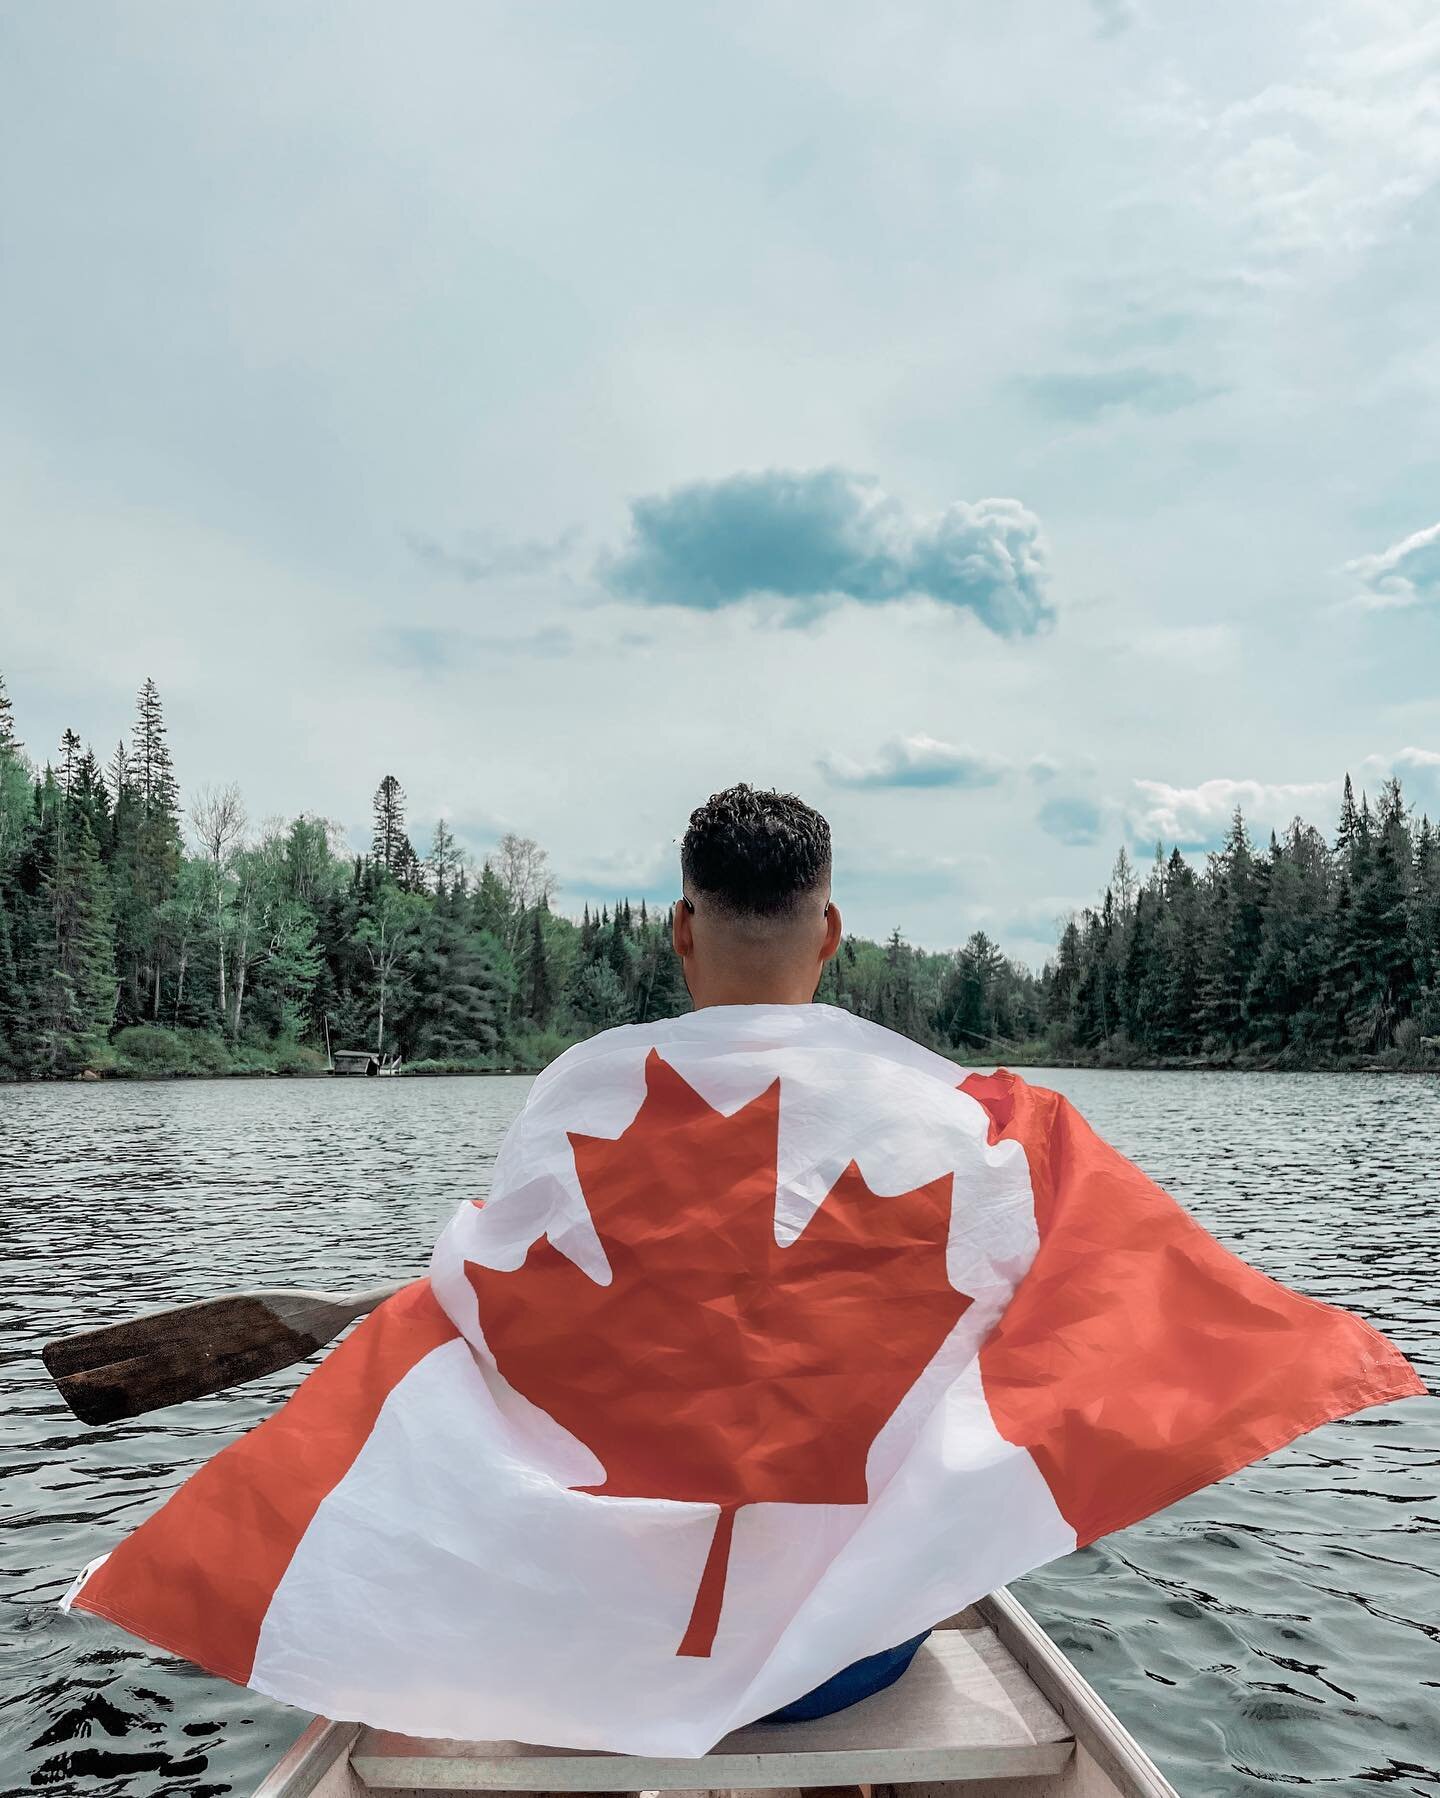 This summer marks 25 years since my family moved to this beautiful country from Florida. 

I&rsquo;ve enjoyed getting lost in this country more and more over the last few years and am looking forward to many more adventures. 🇨🇦 🍁 

#canada #toront